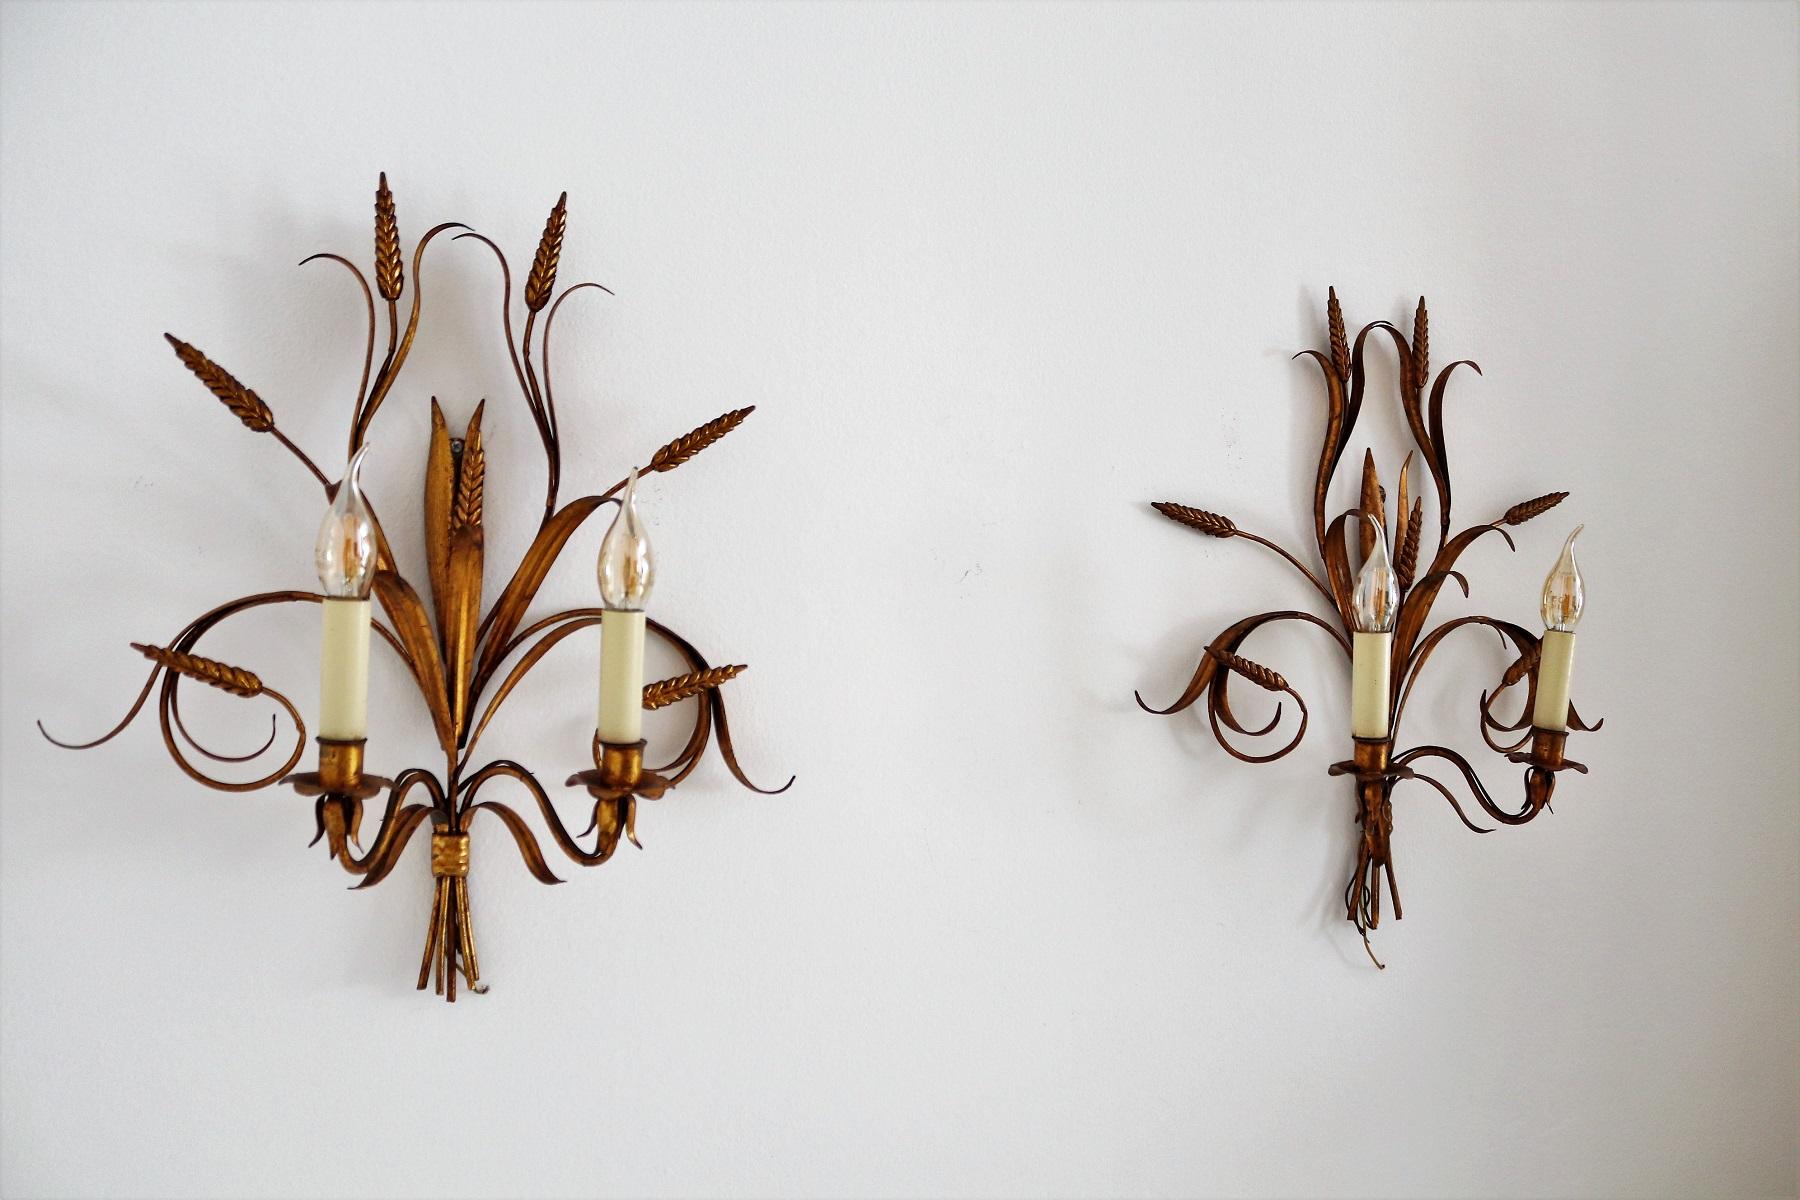 Italian Midcentury Gilt Tole Wall Sconces with Wheat Sheaf, 1950s, Set of Five For Sale 4